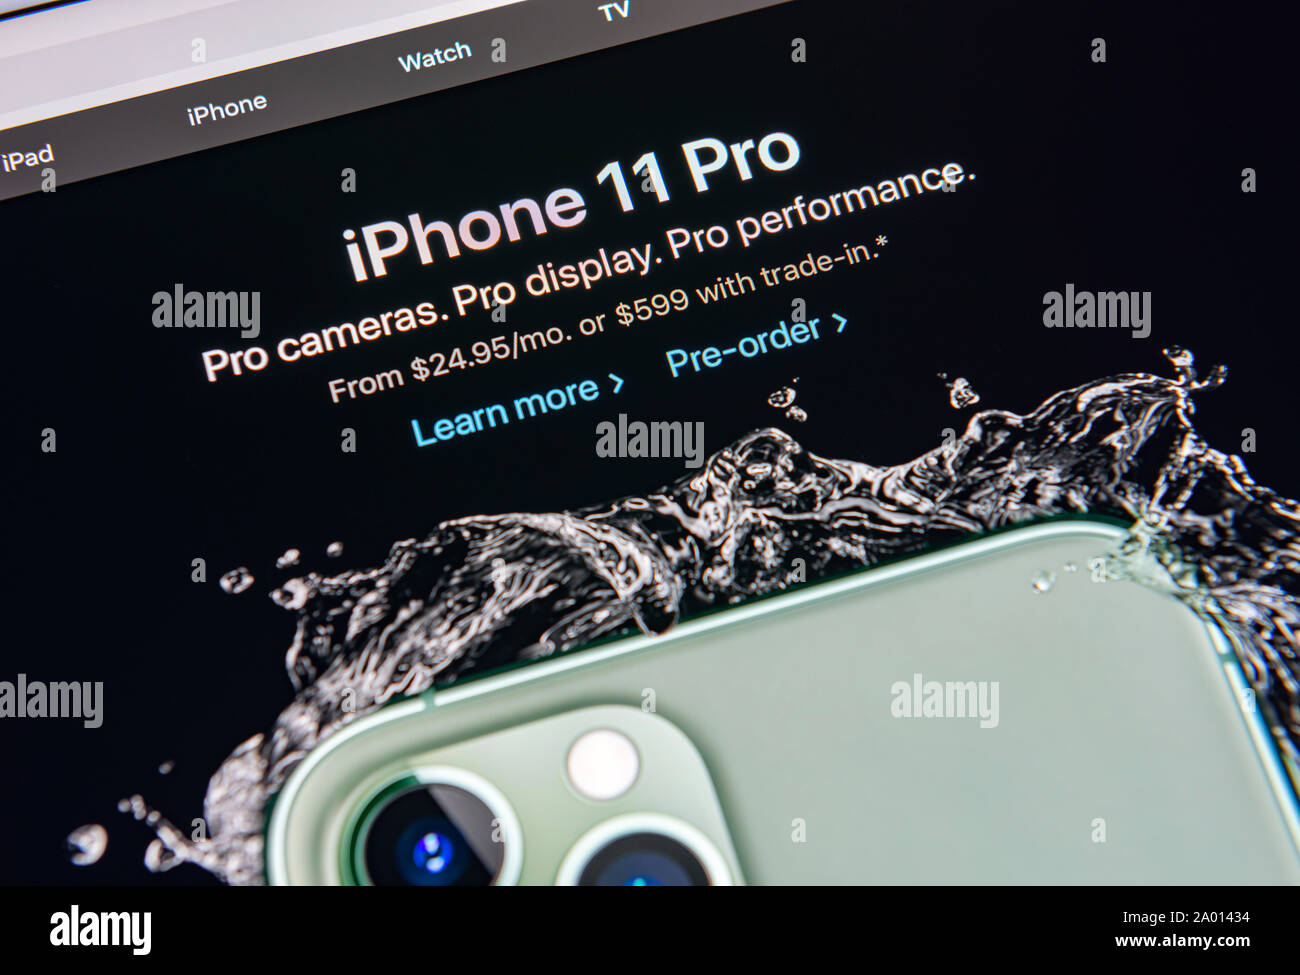 Kyiv, Ukraine - September 12, 2019: A close-up shot of apple.com website with announcement about Apple Inc. officially released the new iPhone 11 Pro Stock Photo